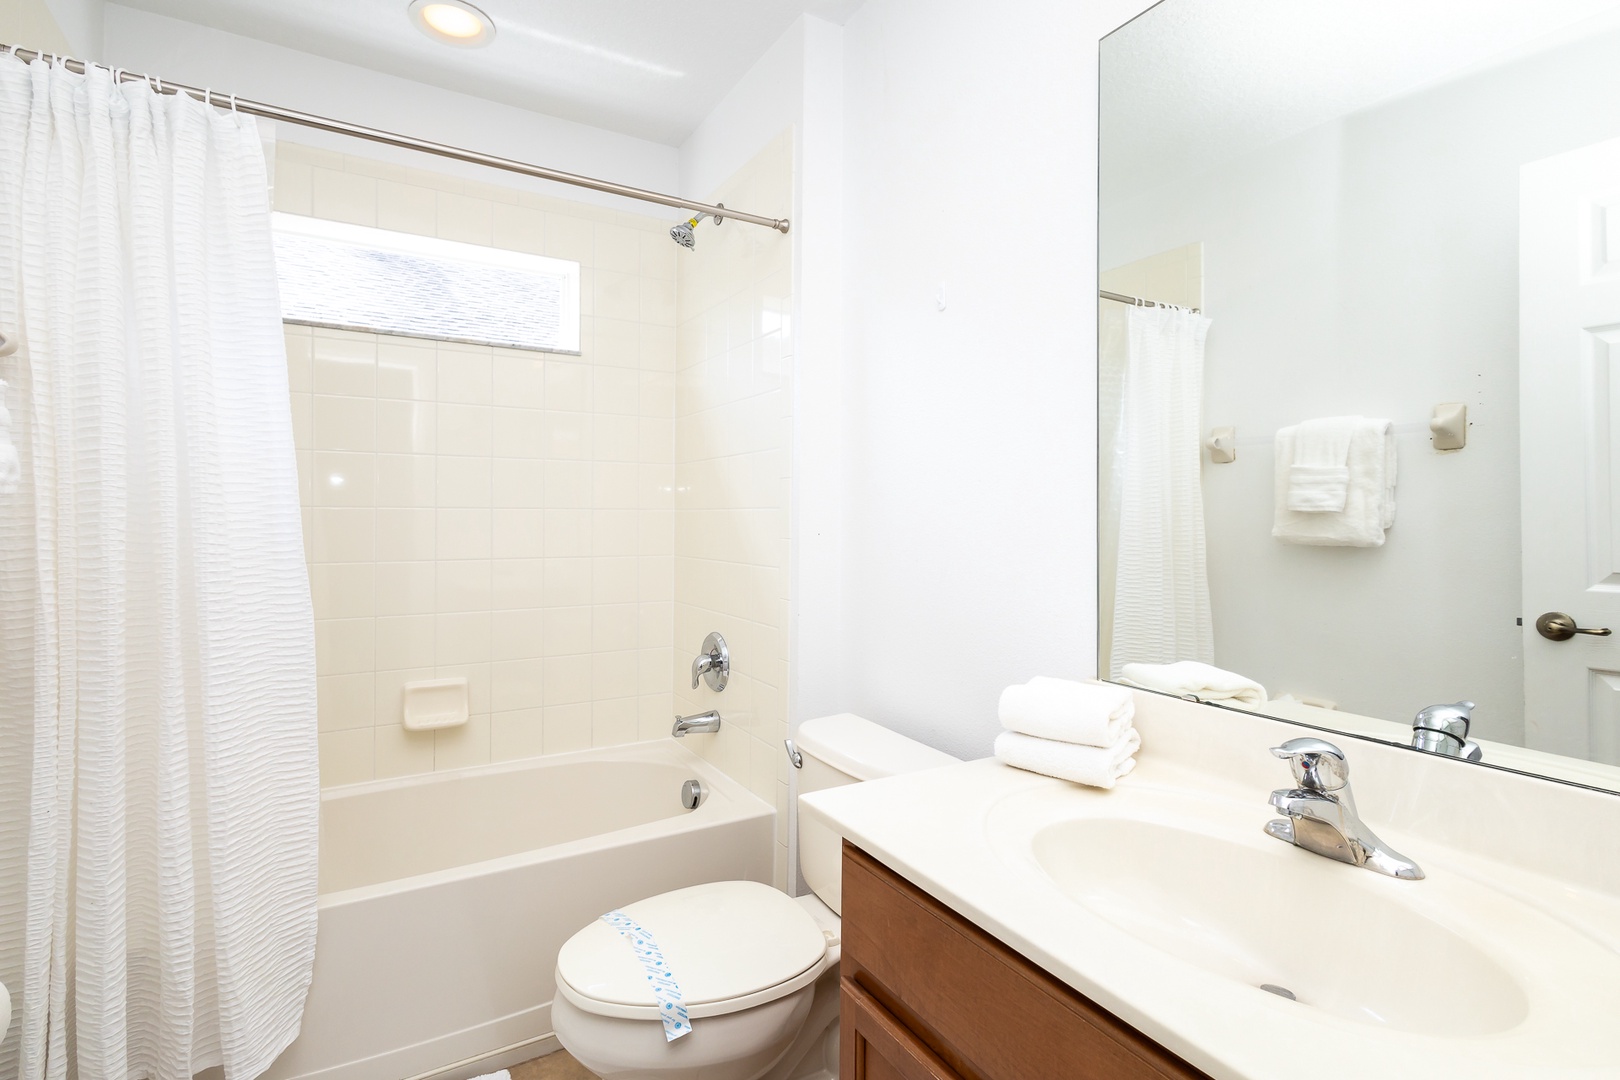 The upstairs shared full bath includes a single vanity & shower/tub combo